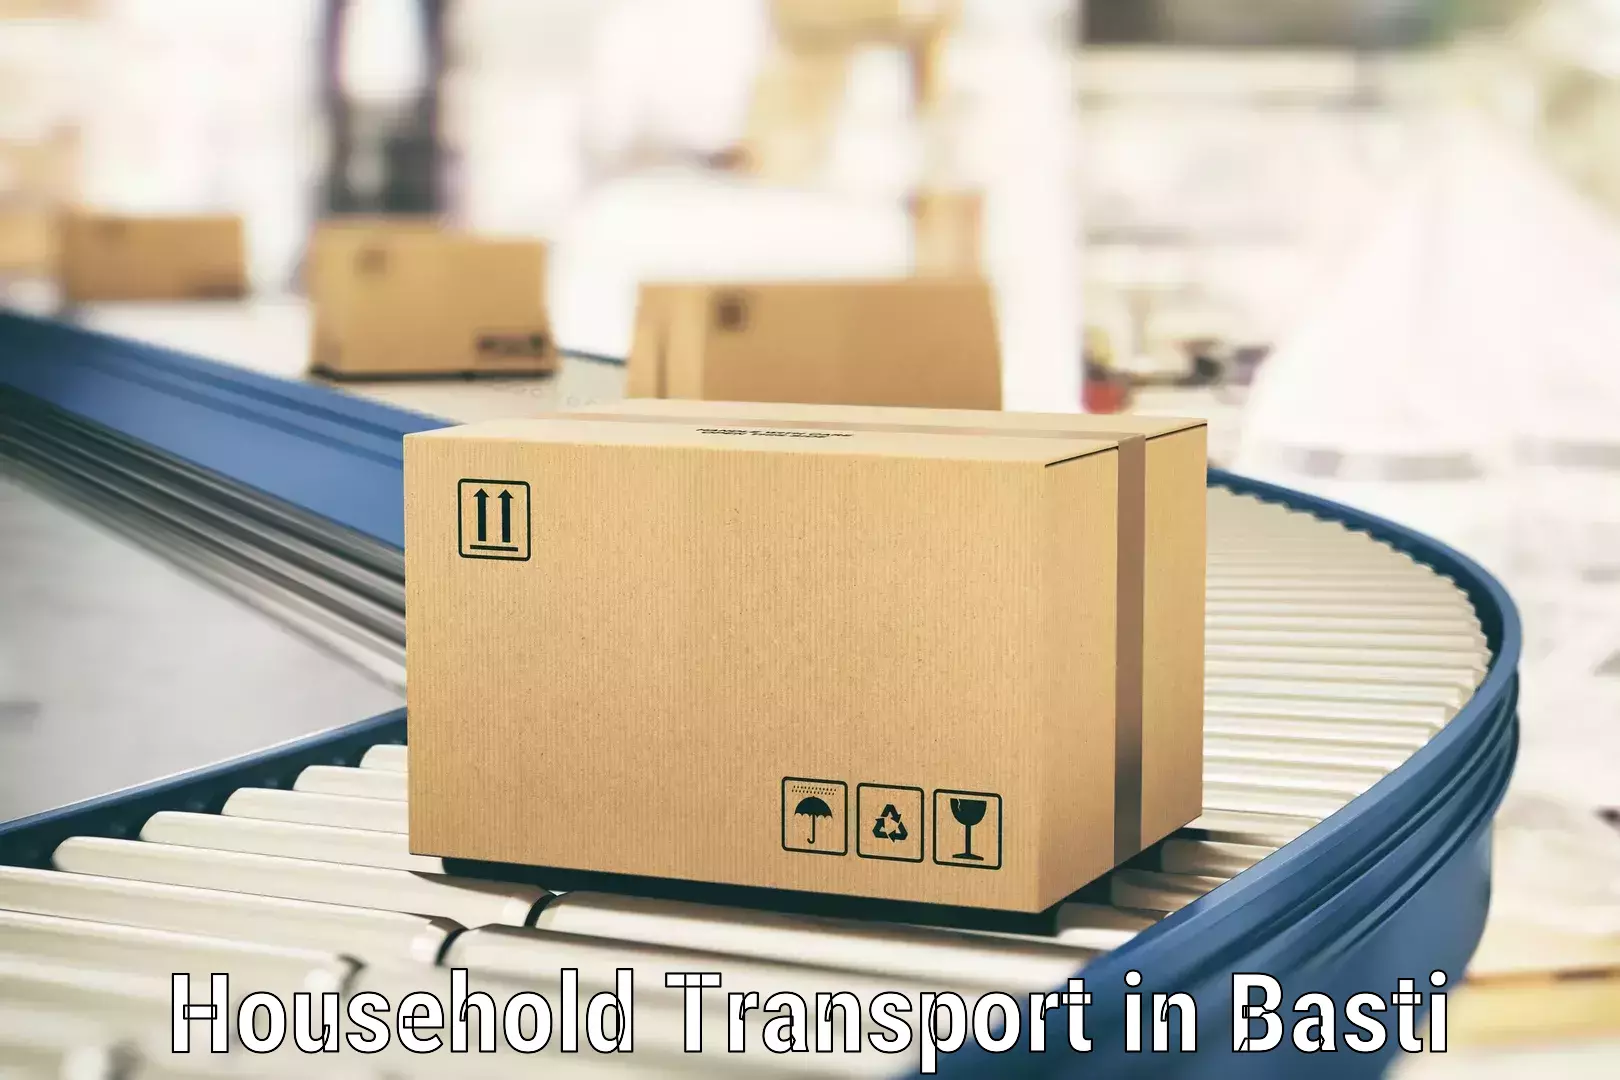 Household transport services in Basti